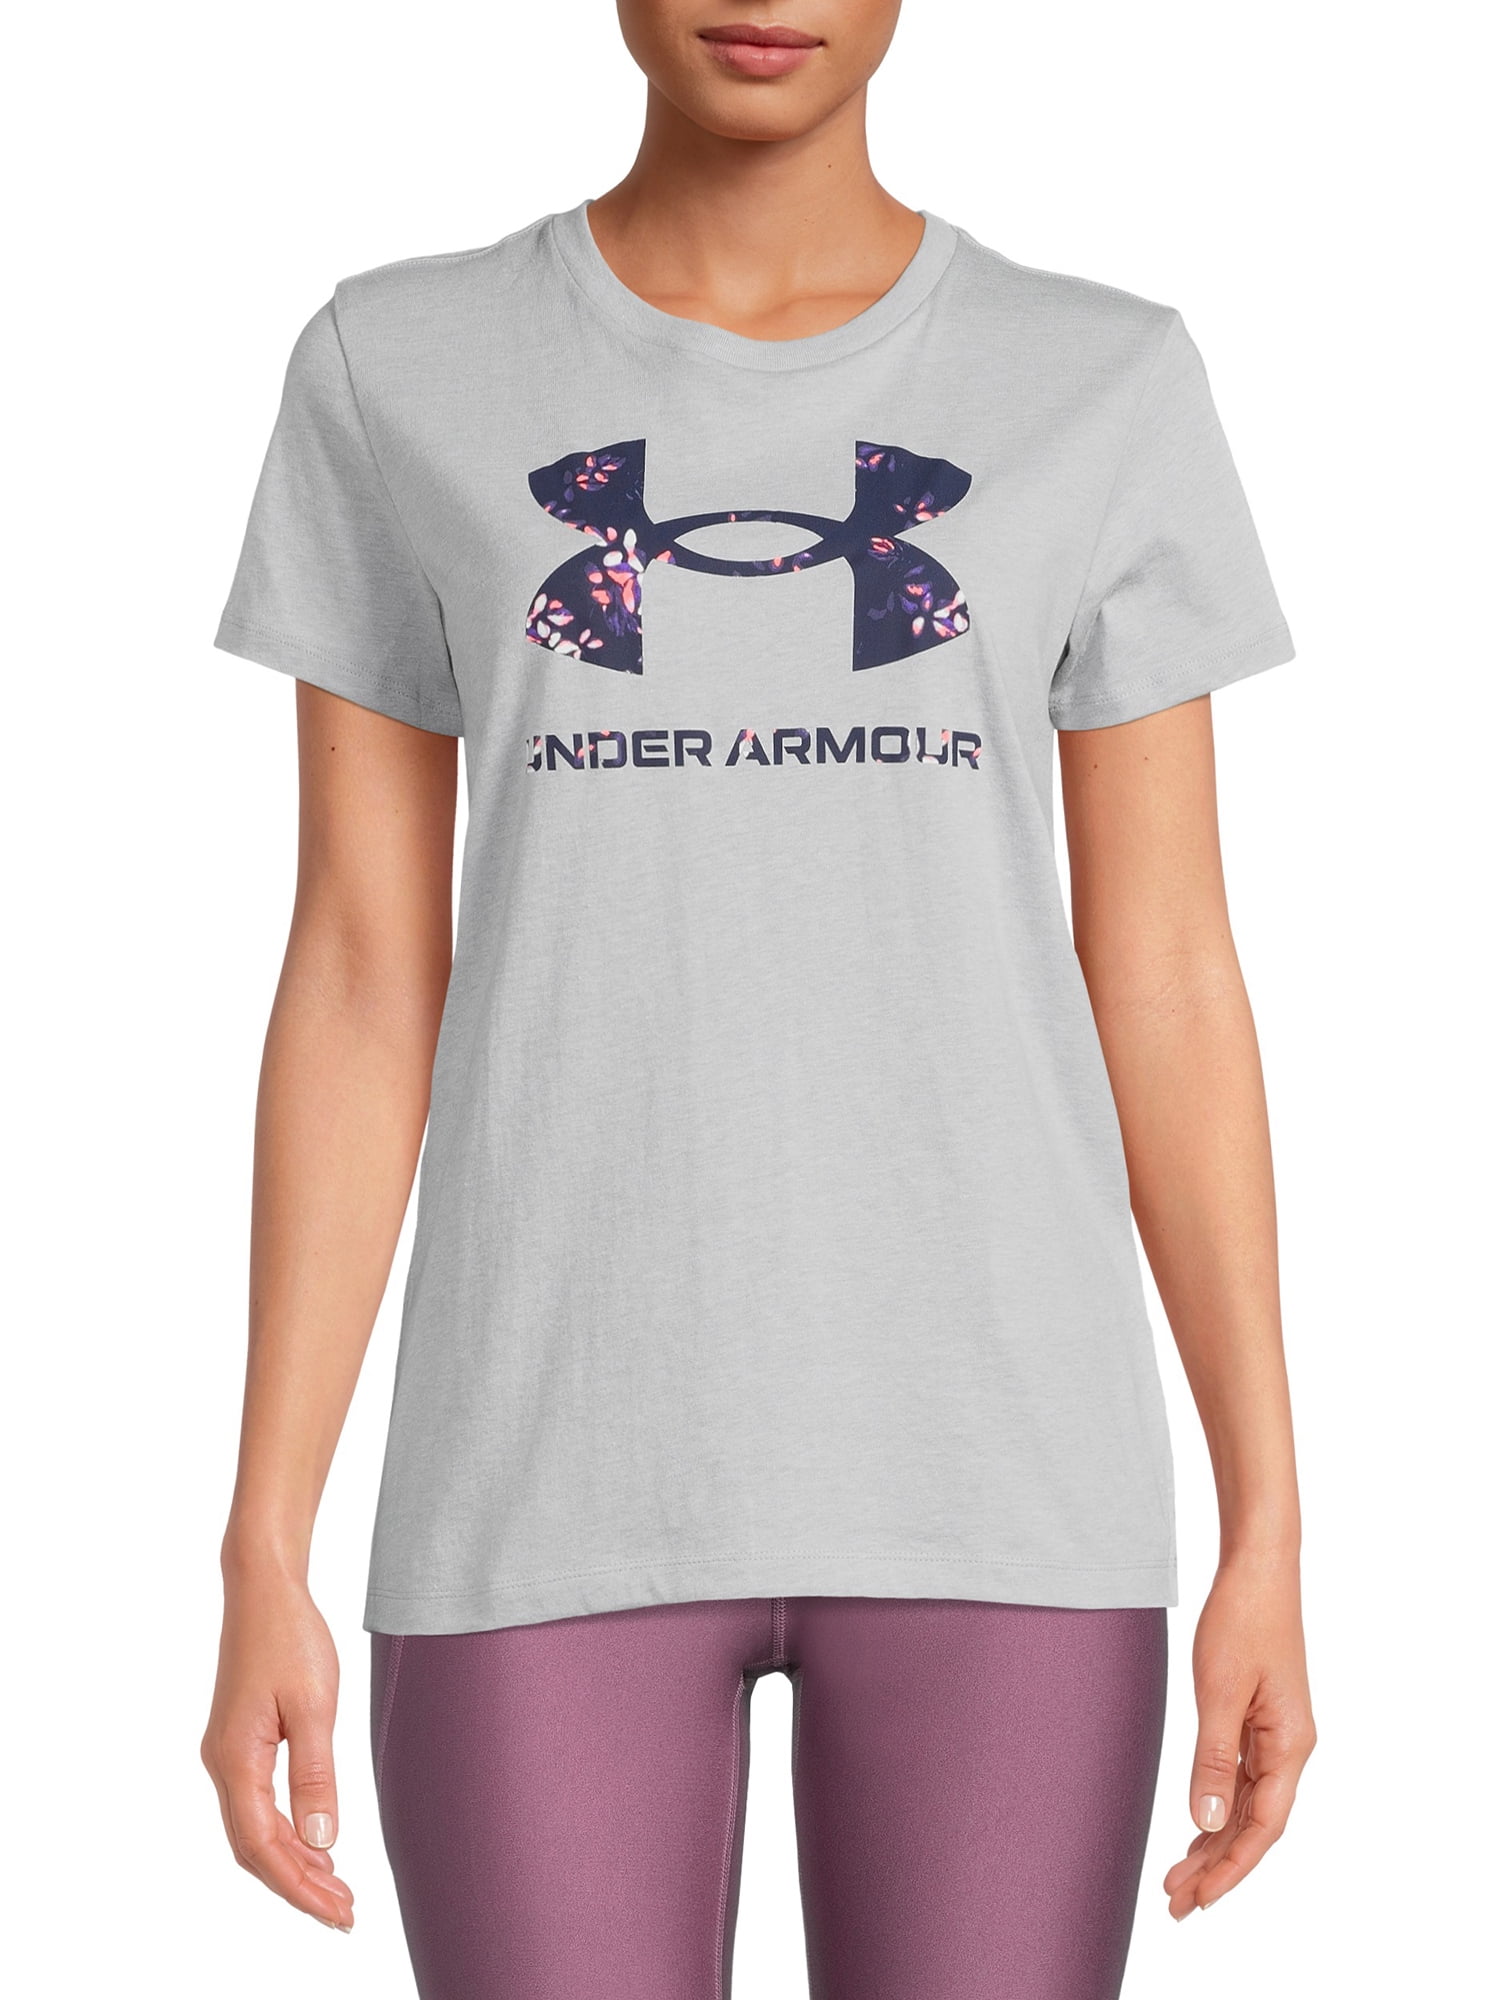 Under Armour Women's Live Sportstyle Graphic Crew Tee with Short Sleeves